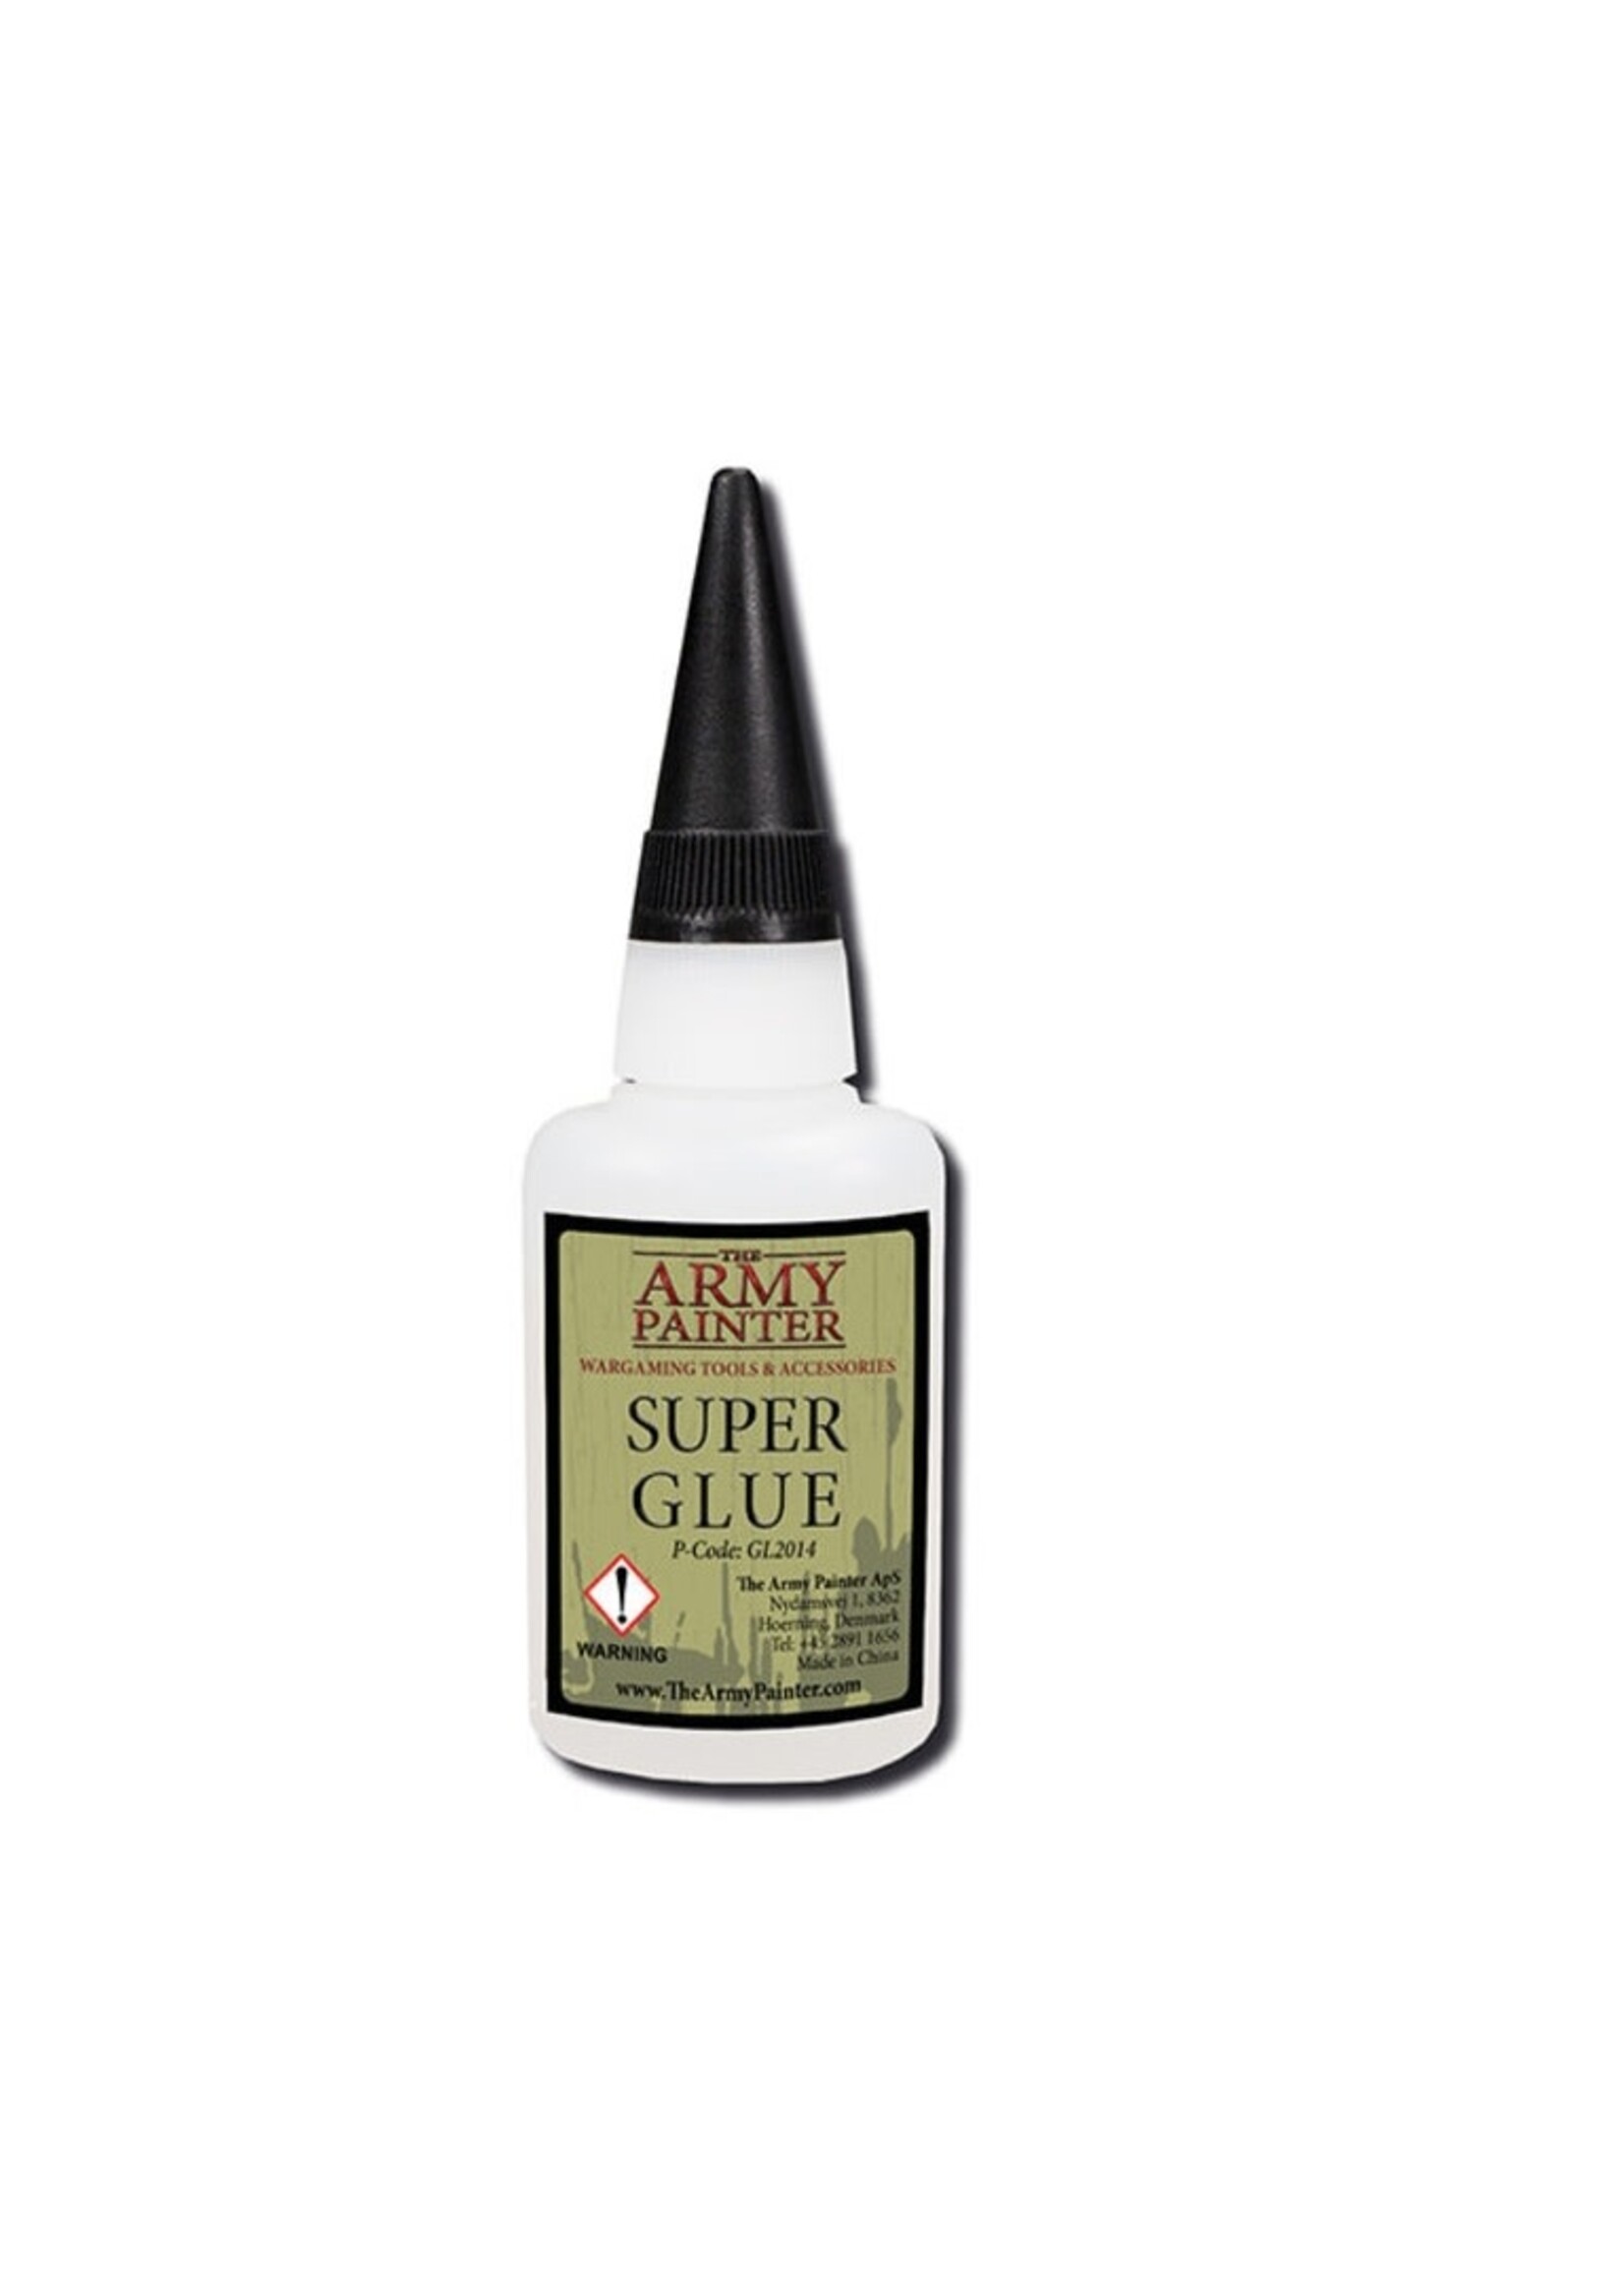 ARMY PAINTER ARMY PAINTER SUPER GLUE 20GM